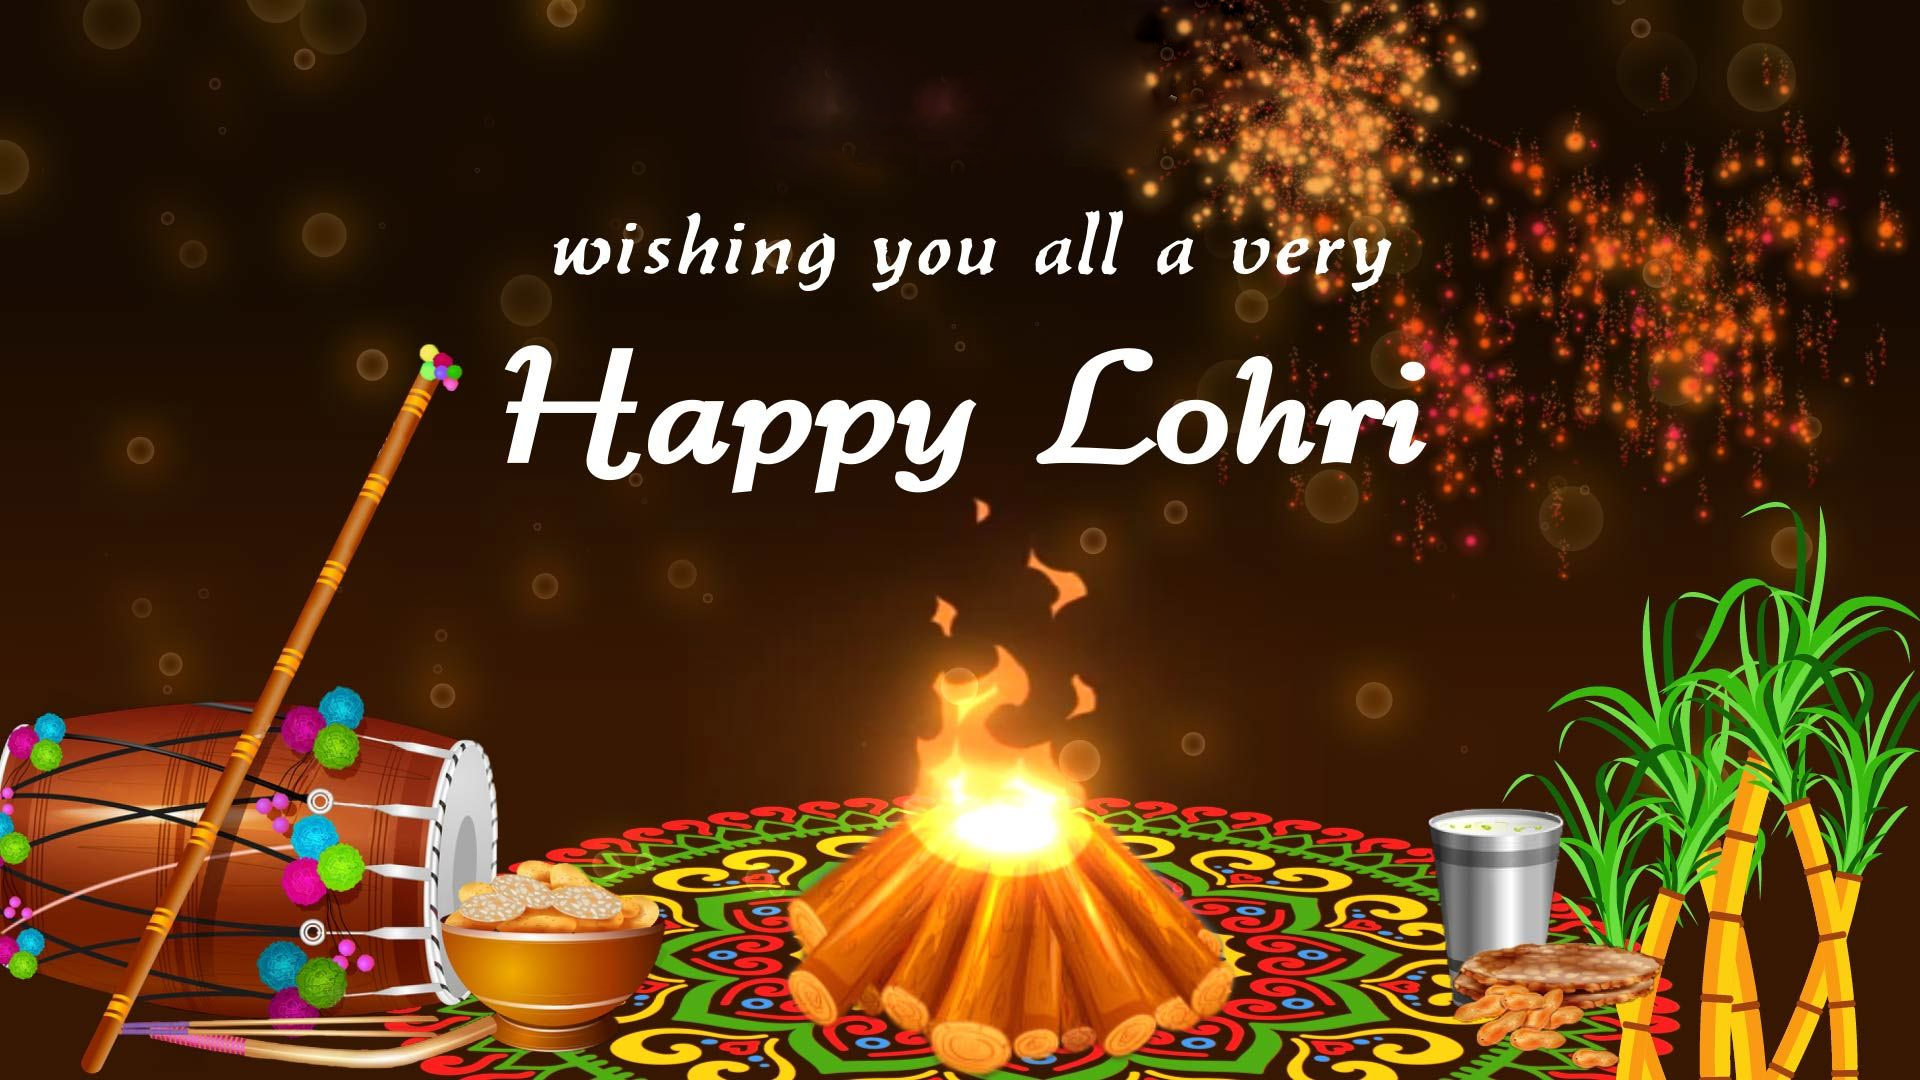 Happy Lohri Wishes Hd Wallpapers Download